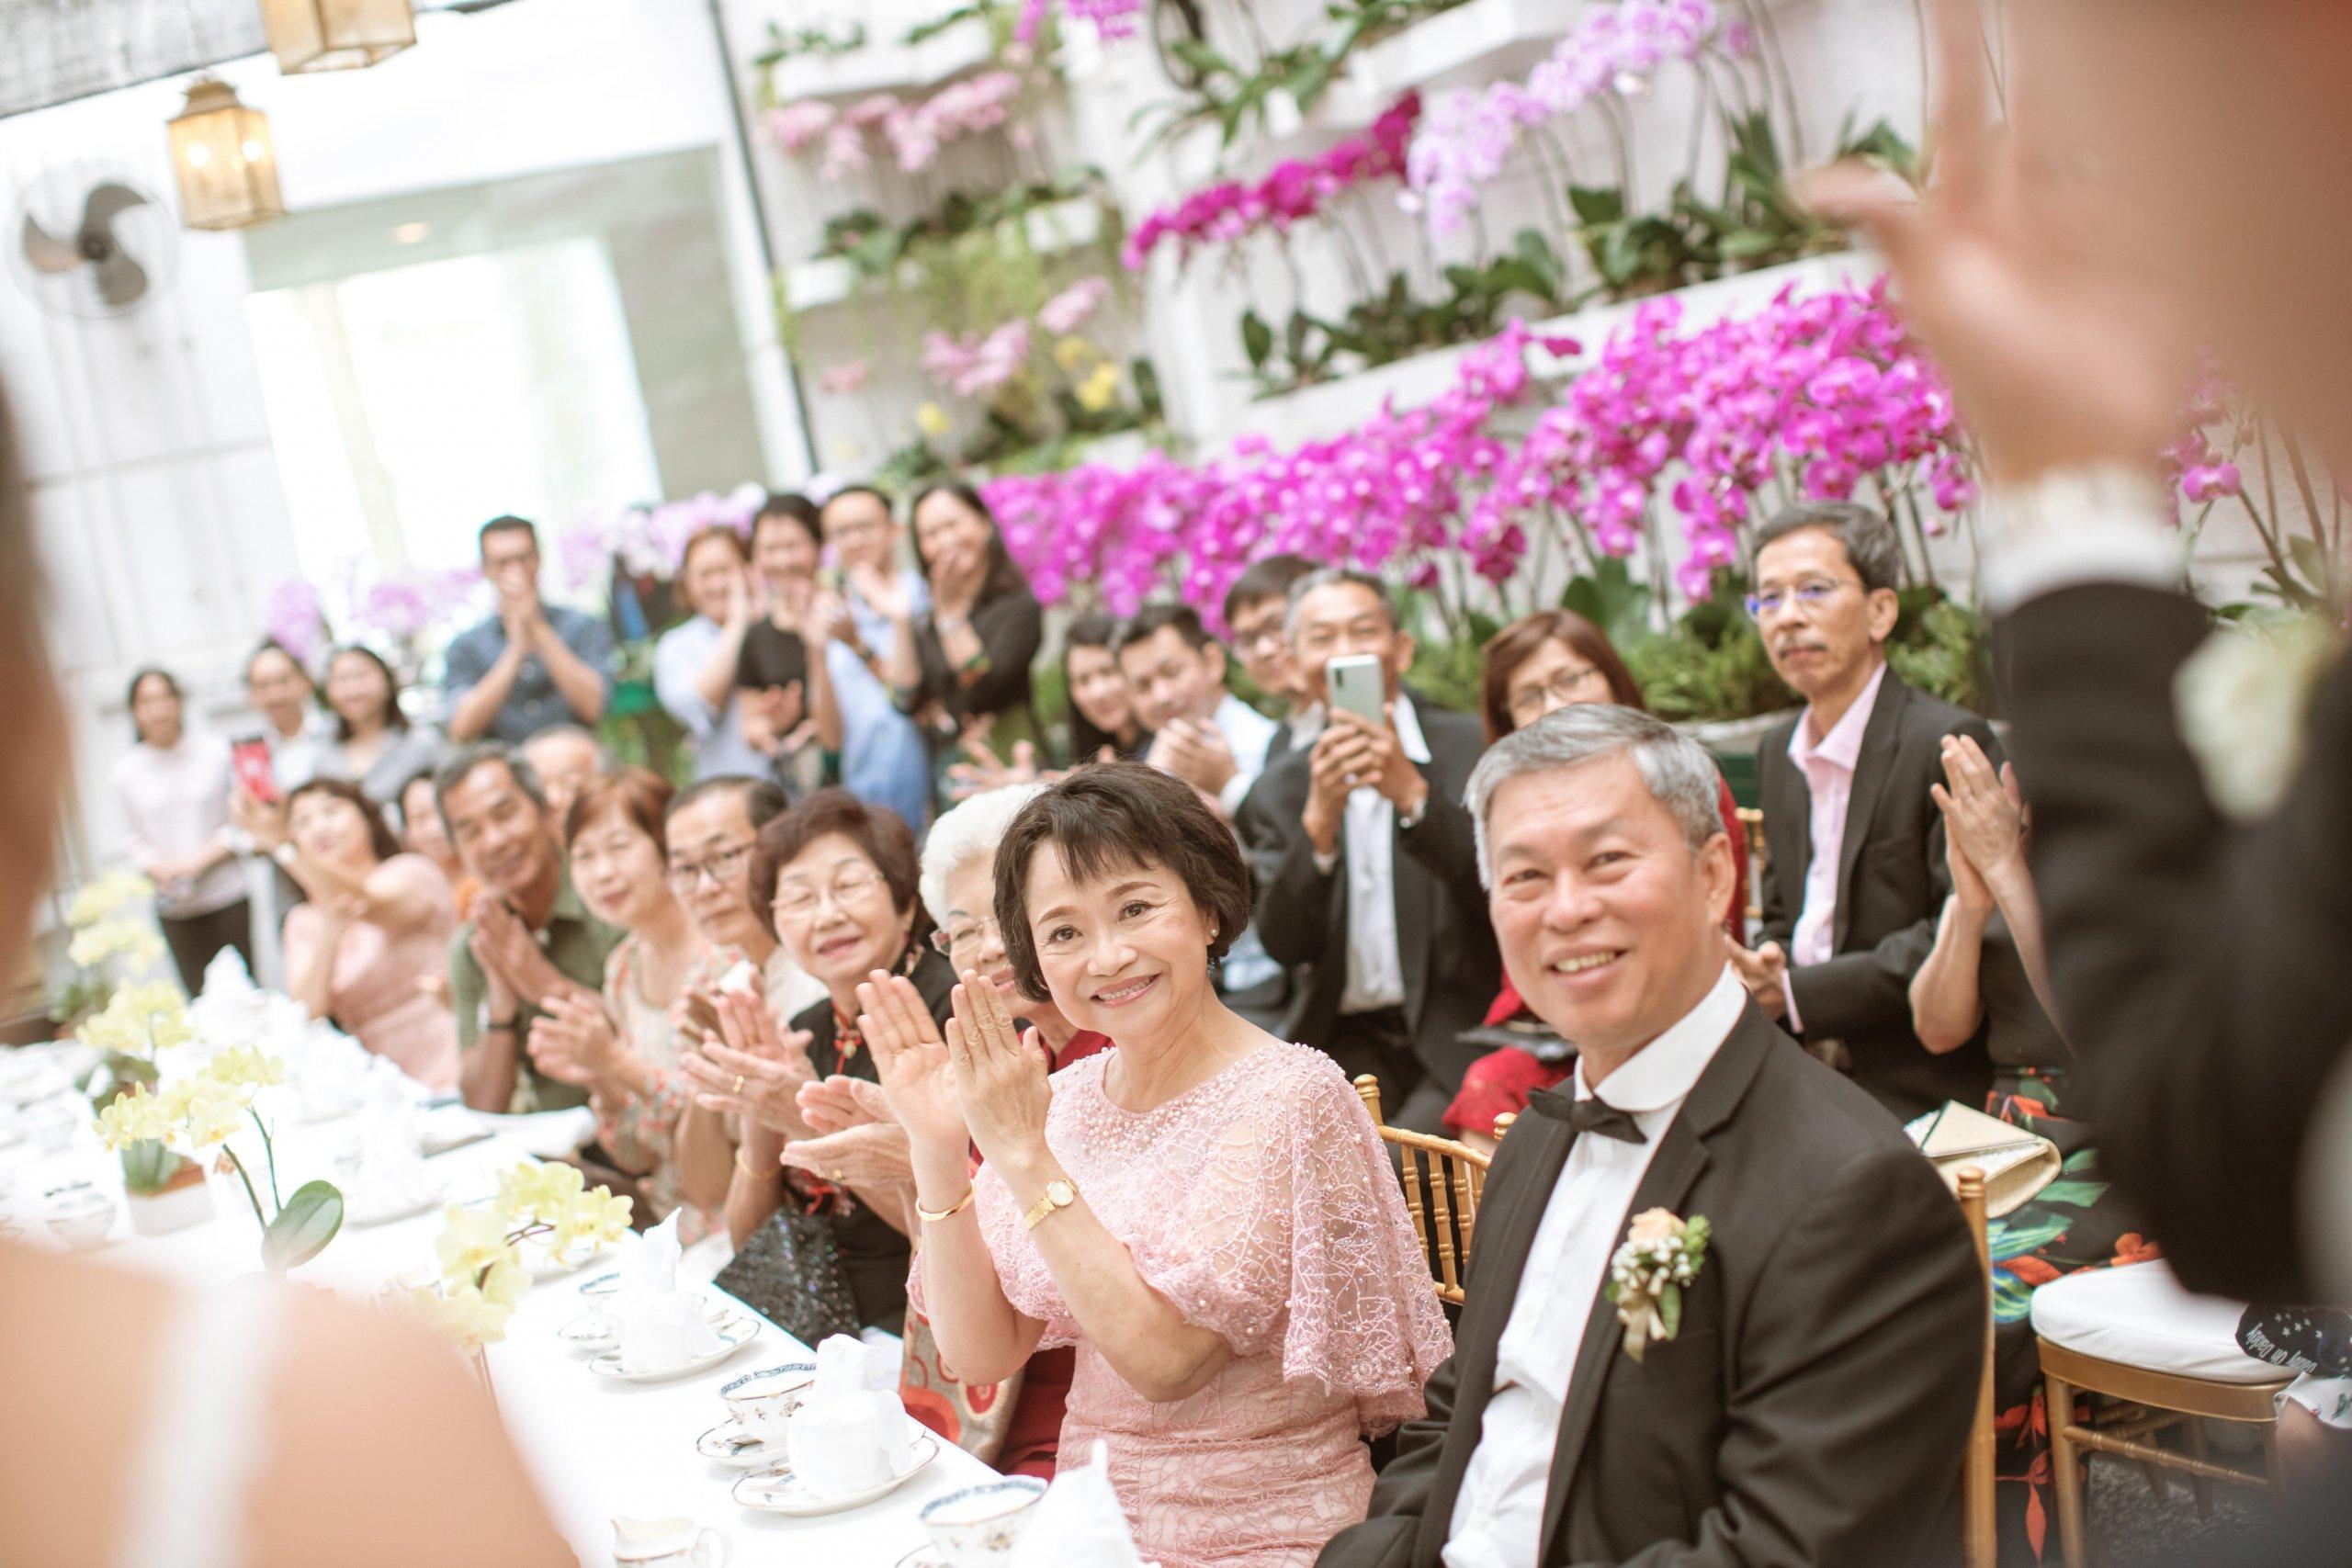 Exchange rings ROM ceremony actual day The Majestic Hotel Kuala Lumpur Cross cultural wedding japnese malaysian